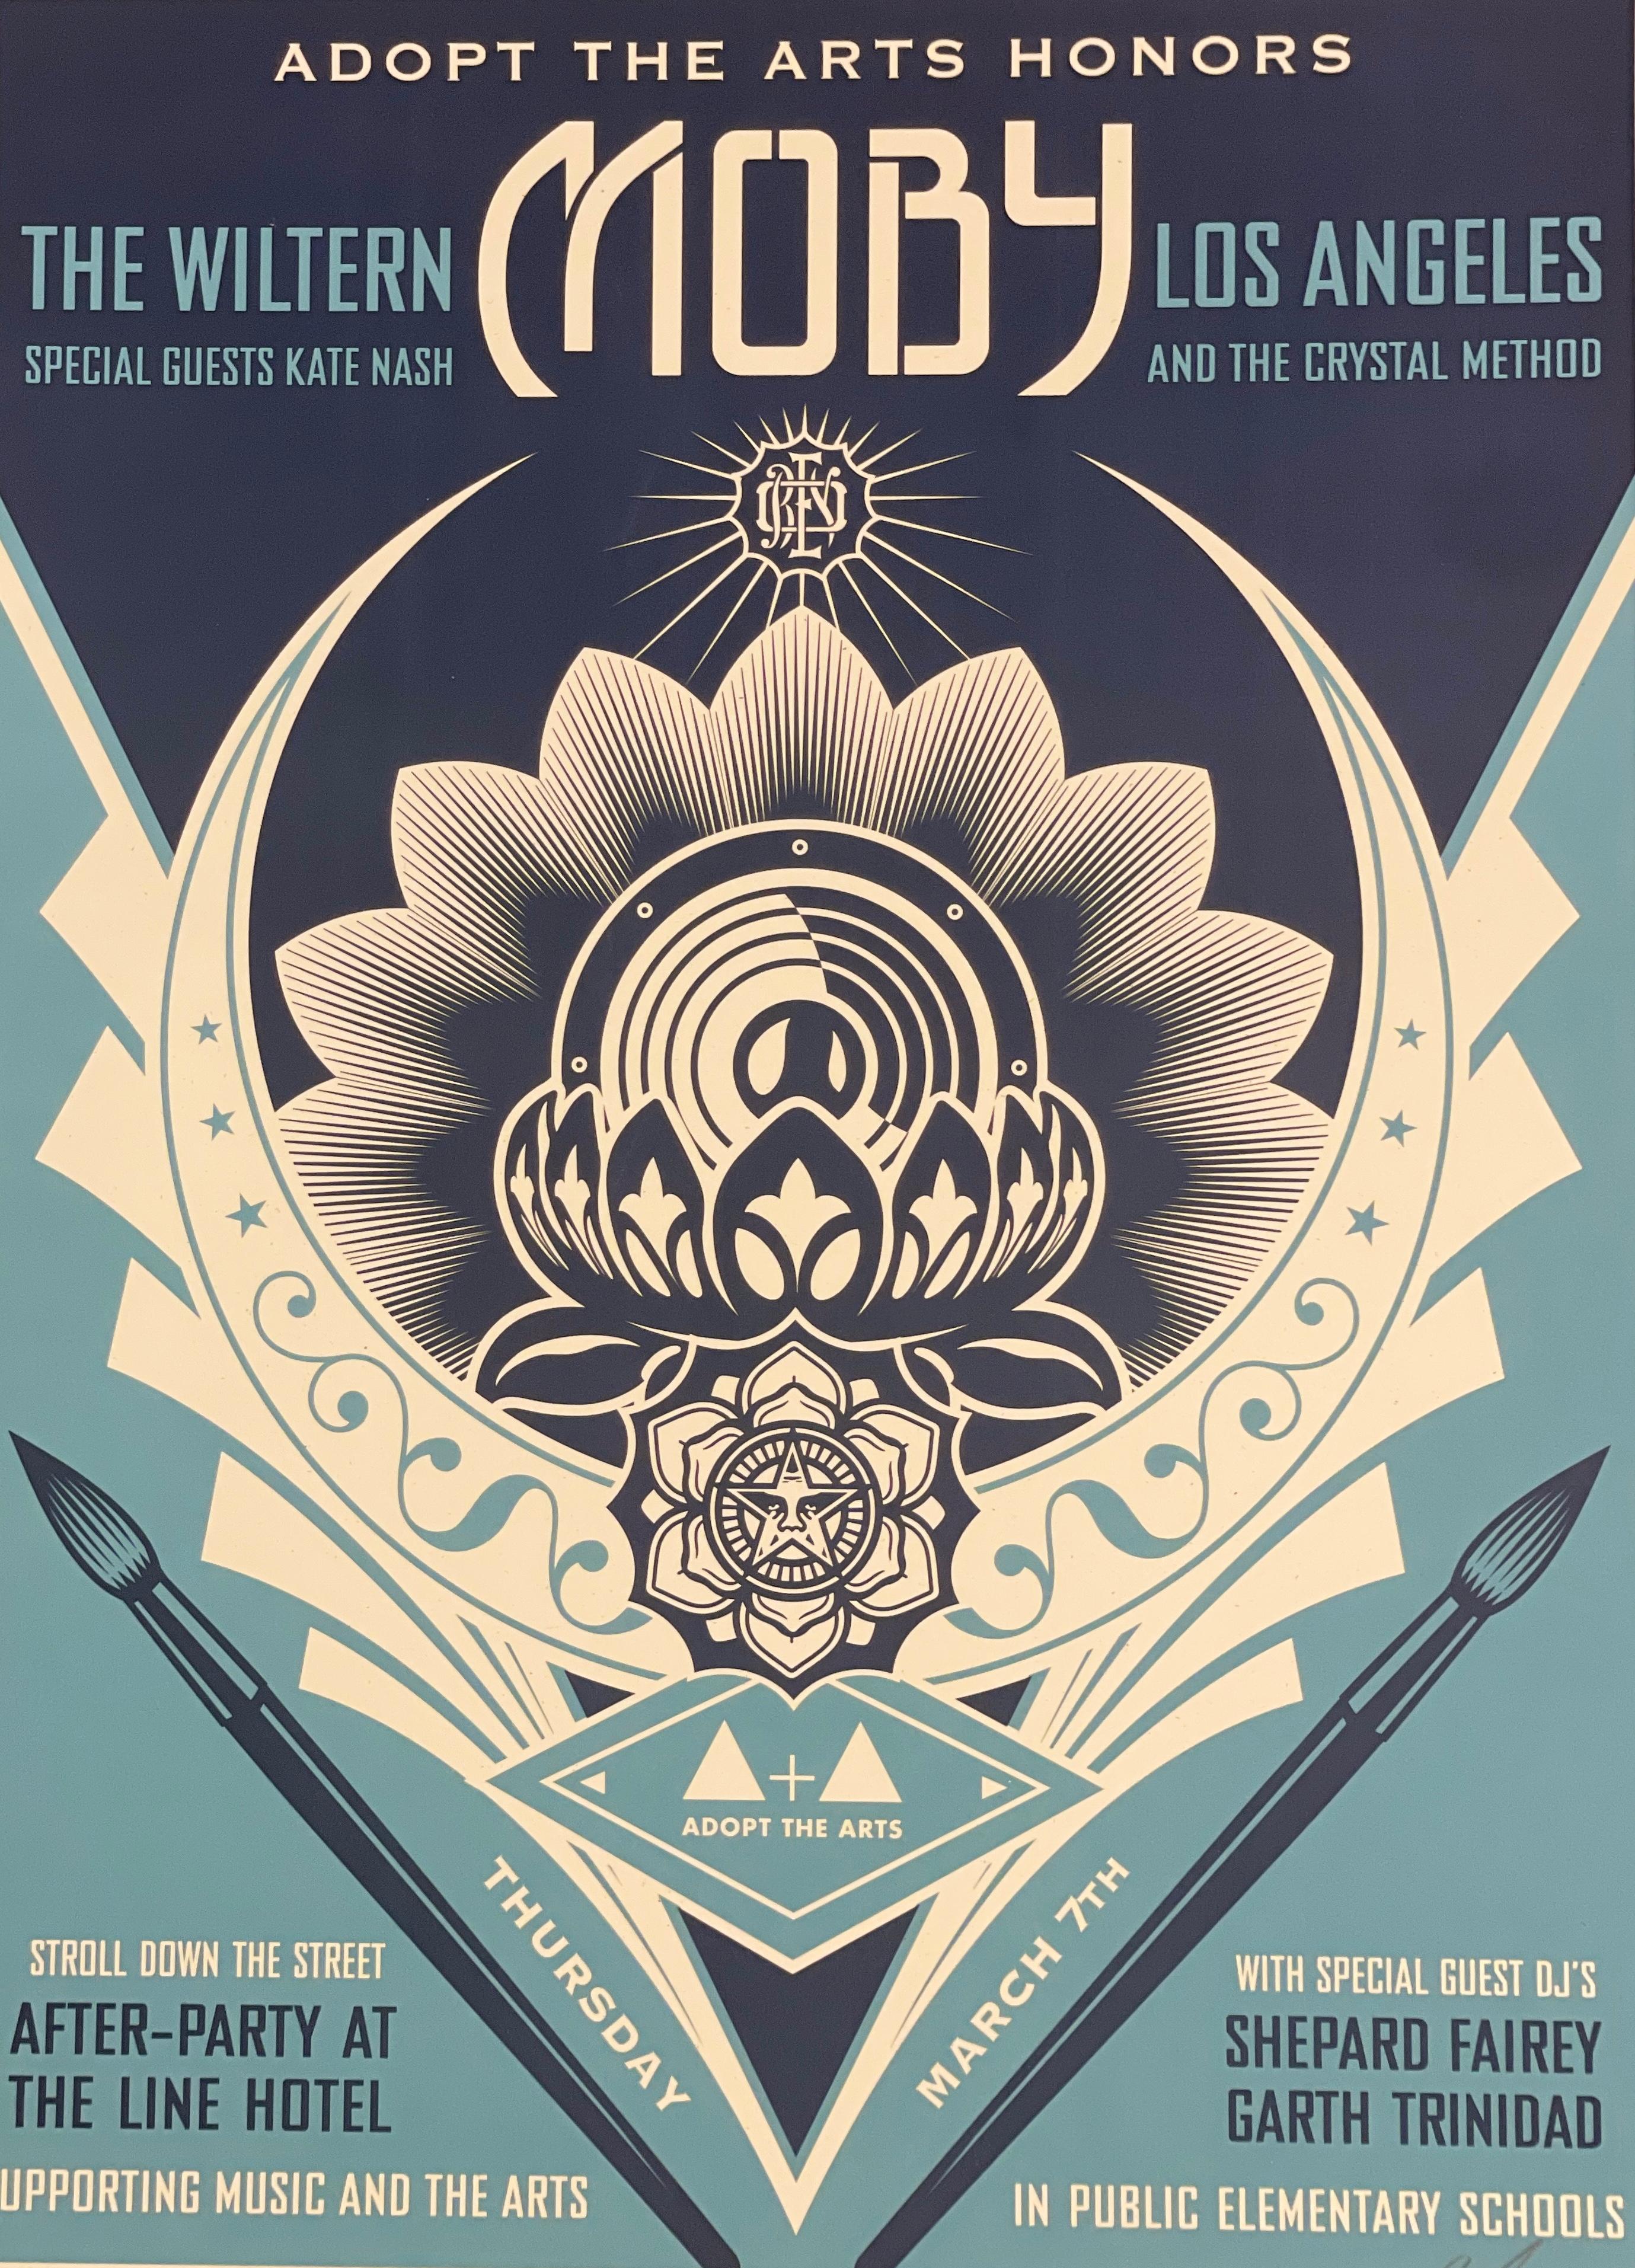 I'm honored to be a part of the Adopt the Arts’ 7th annual gala and fundraiser tonight honoring my good friend @moby and benefitting programs for kids! I created this Adopt the Arts Lotus print to commemorate the night which you get if you purchased